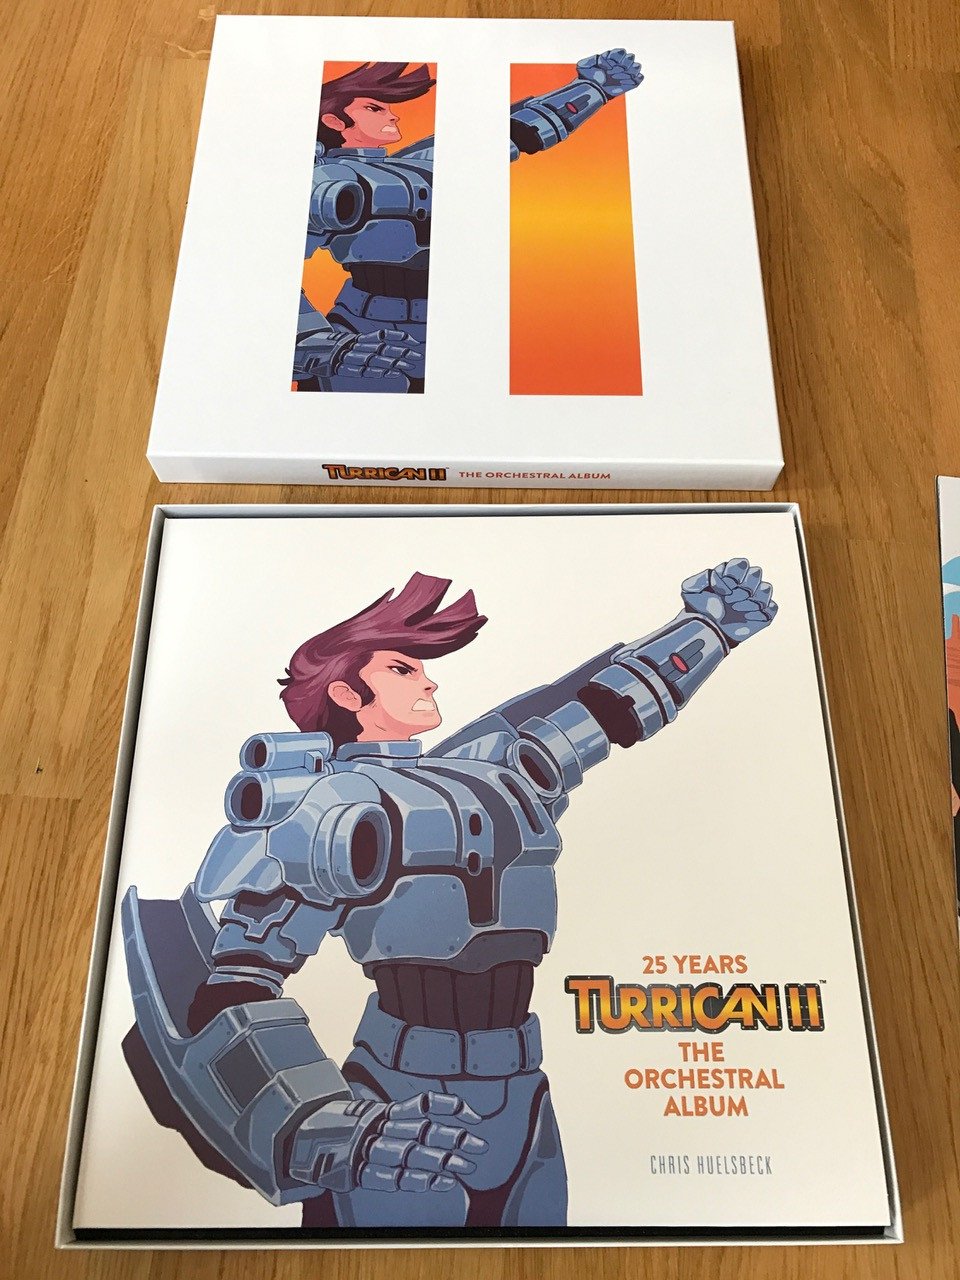 Turrican II - The Orchestral Album (Deluxe Limited Edition Double Vinyl + CD Box Set with additional high quality art prints  & digital downloads)